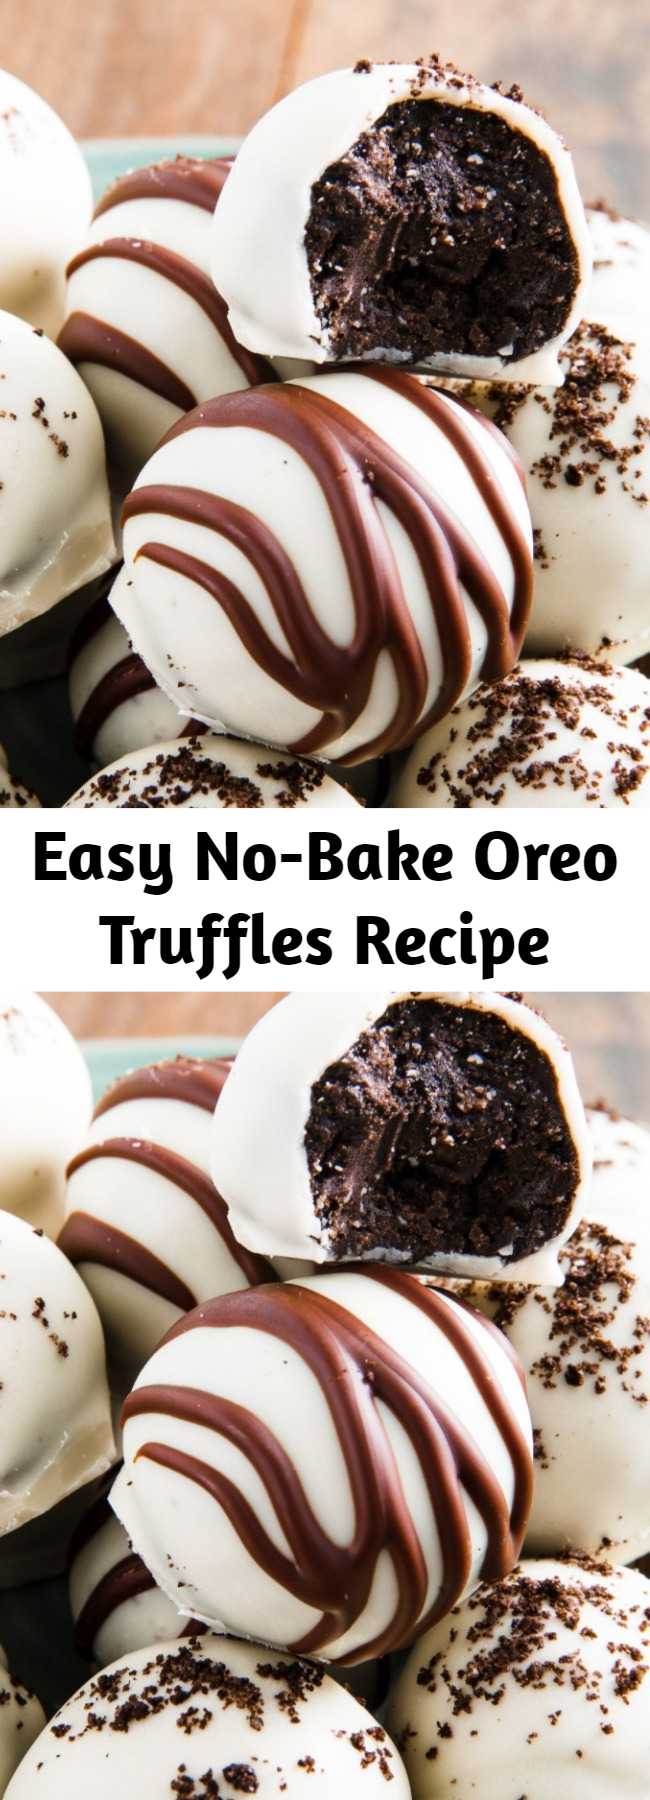 Easy No-Bake Oreo Truffles Recipe - When it comes to homemade desserts, it doesn't get much easier than Oreo truffles. You only need four ingredients, and they taste like chocolate cheesecake wrapped in even more chocolate, only you don't have to worry about water baths or preheating the oven.